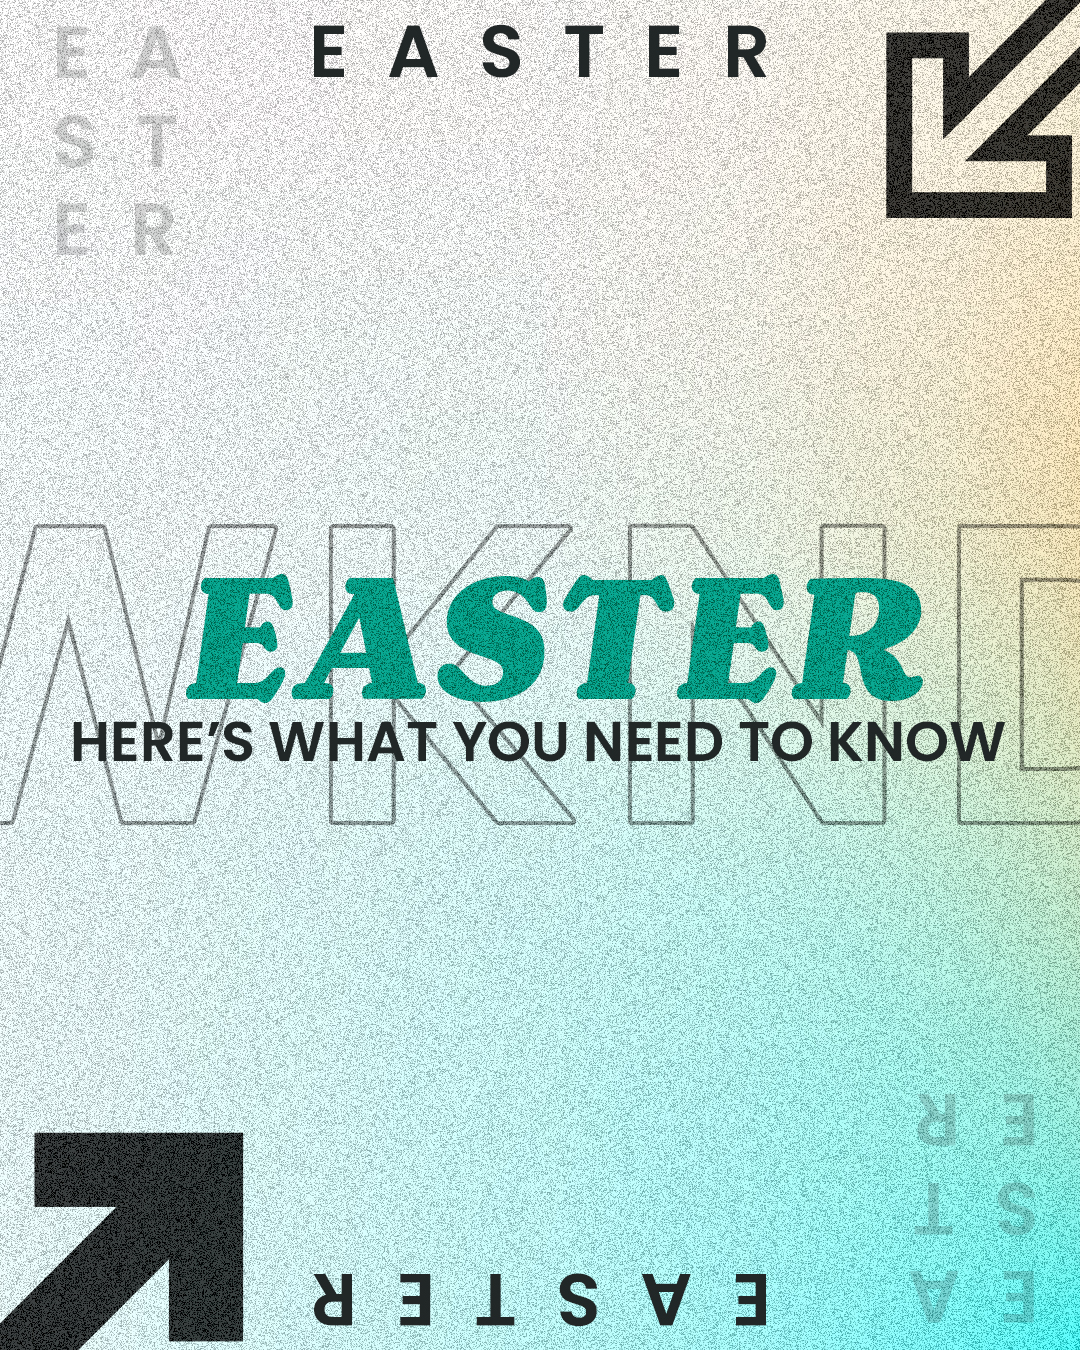 Easter Wknd here’s what you need to know